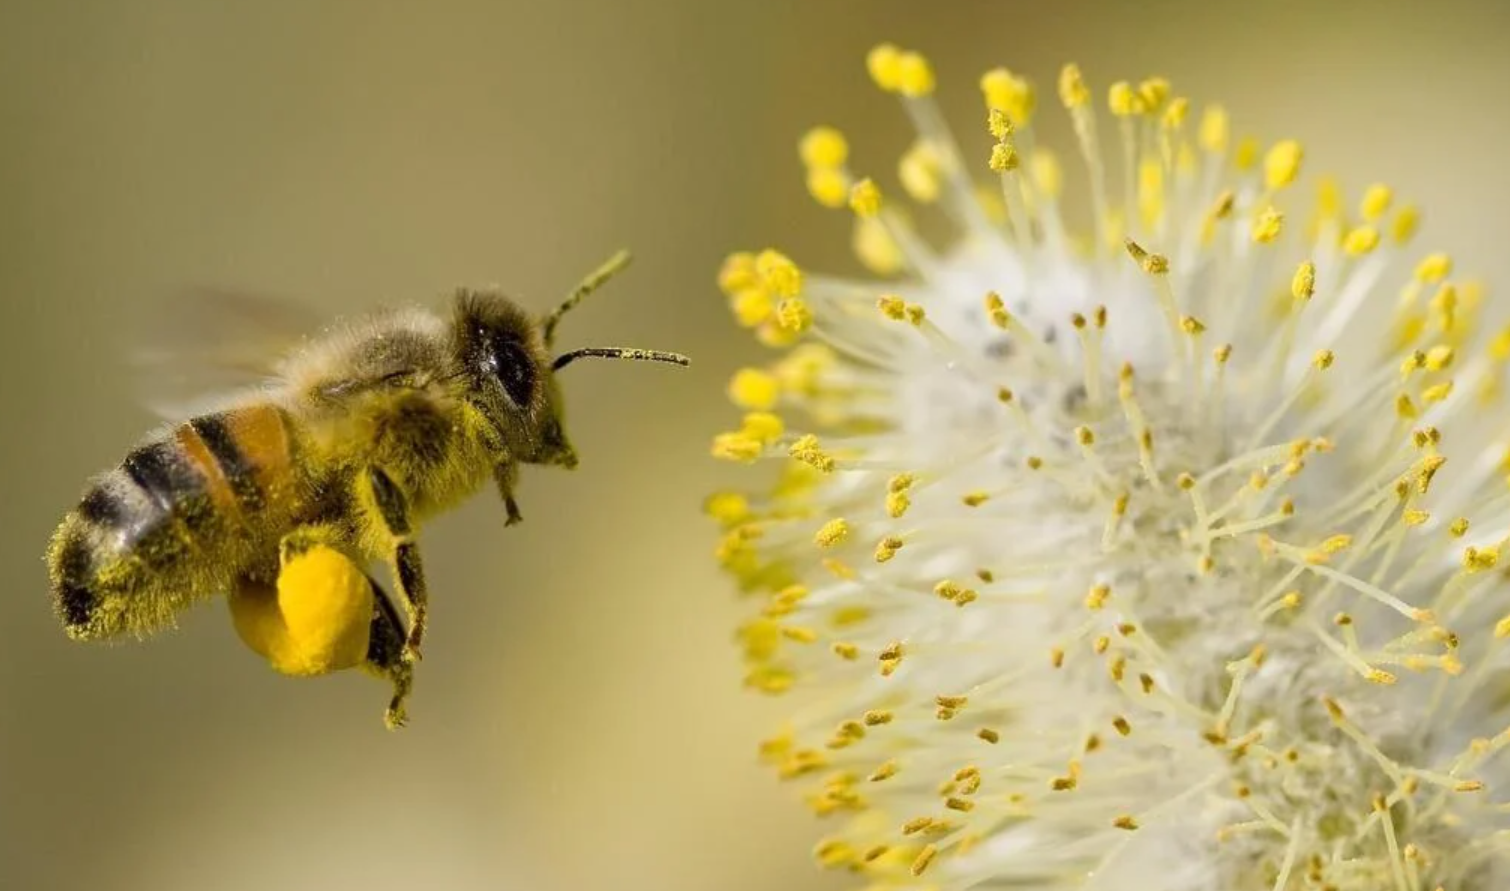 Legal Battle Unfolds Canadian Bee Ban Sparks Controversy